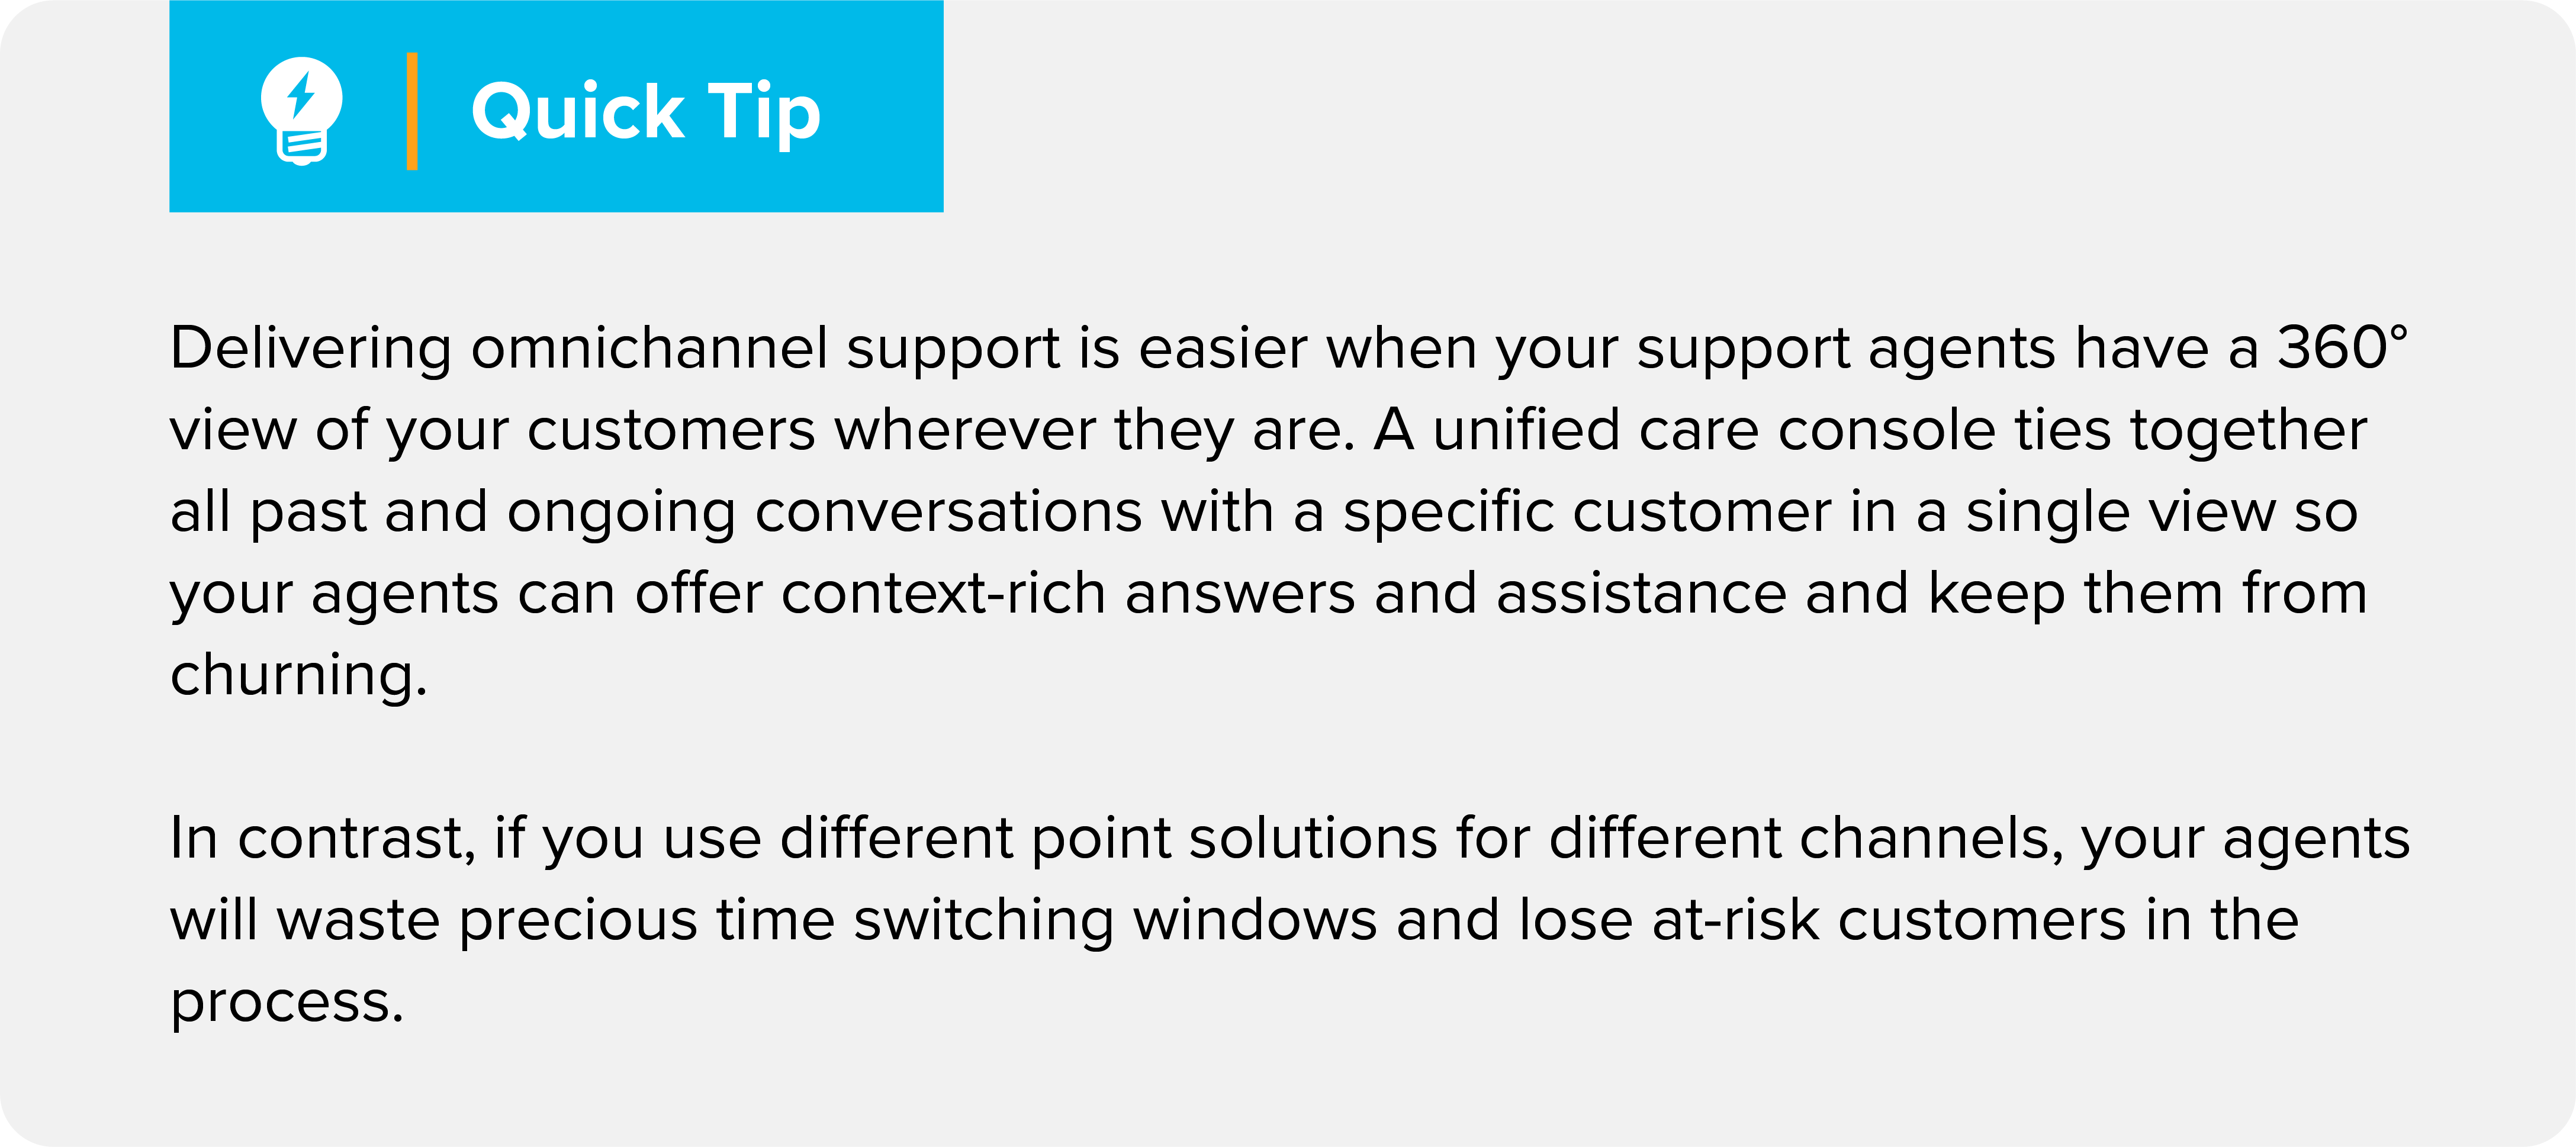 An image with a quick tip about omnichannel support.